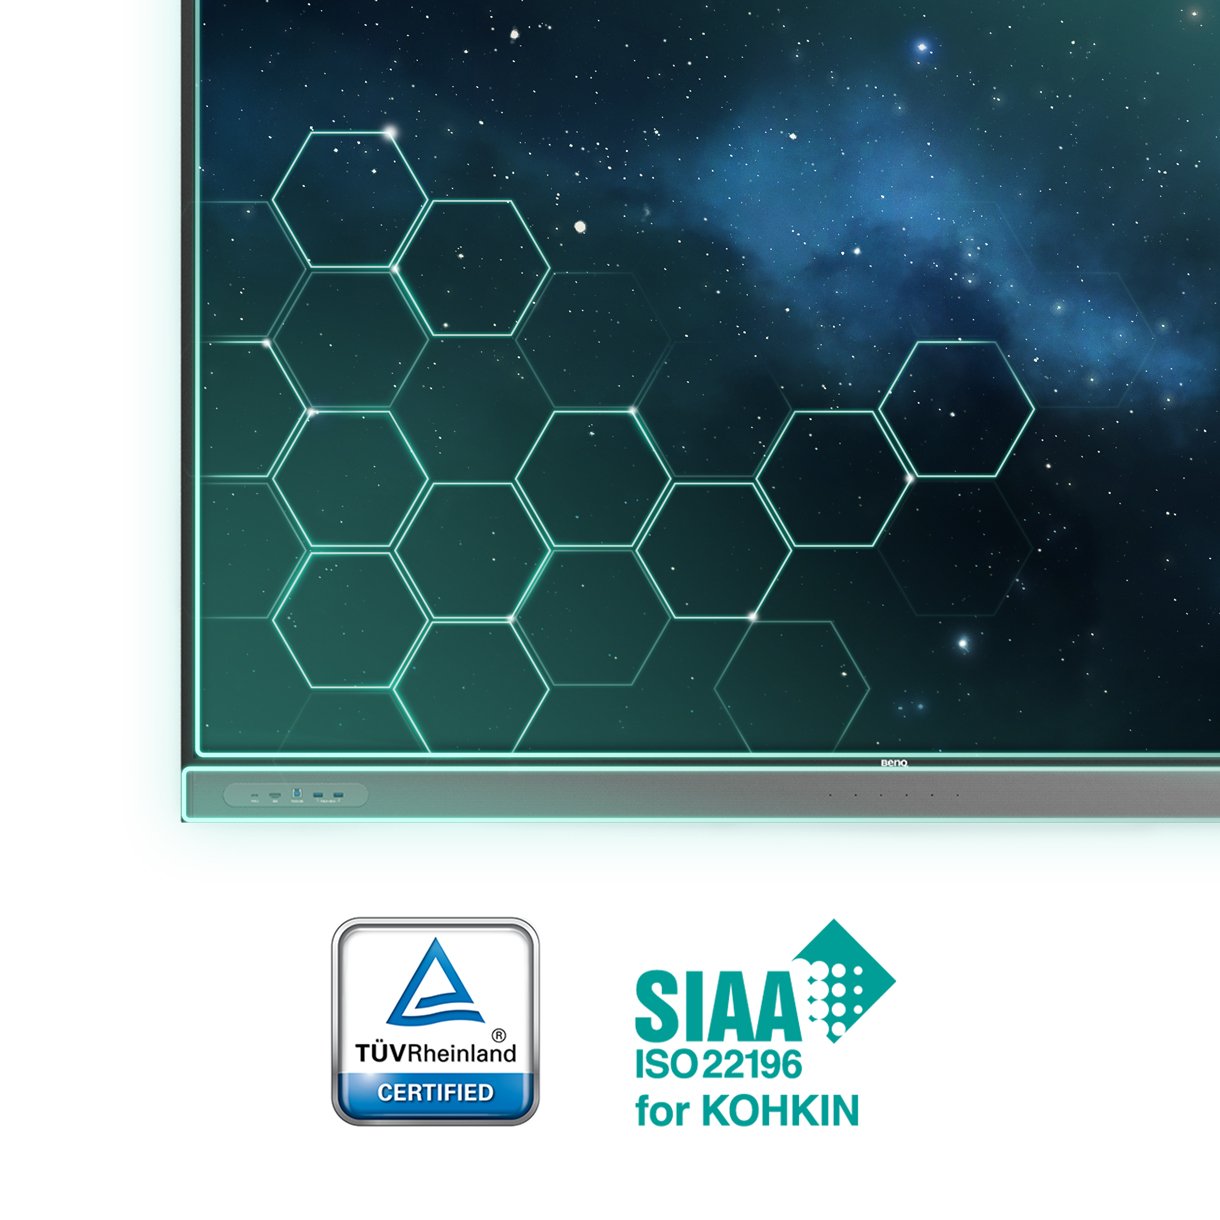 Germ-resistant screen with TUV and SIAA logos